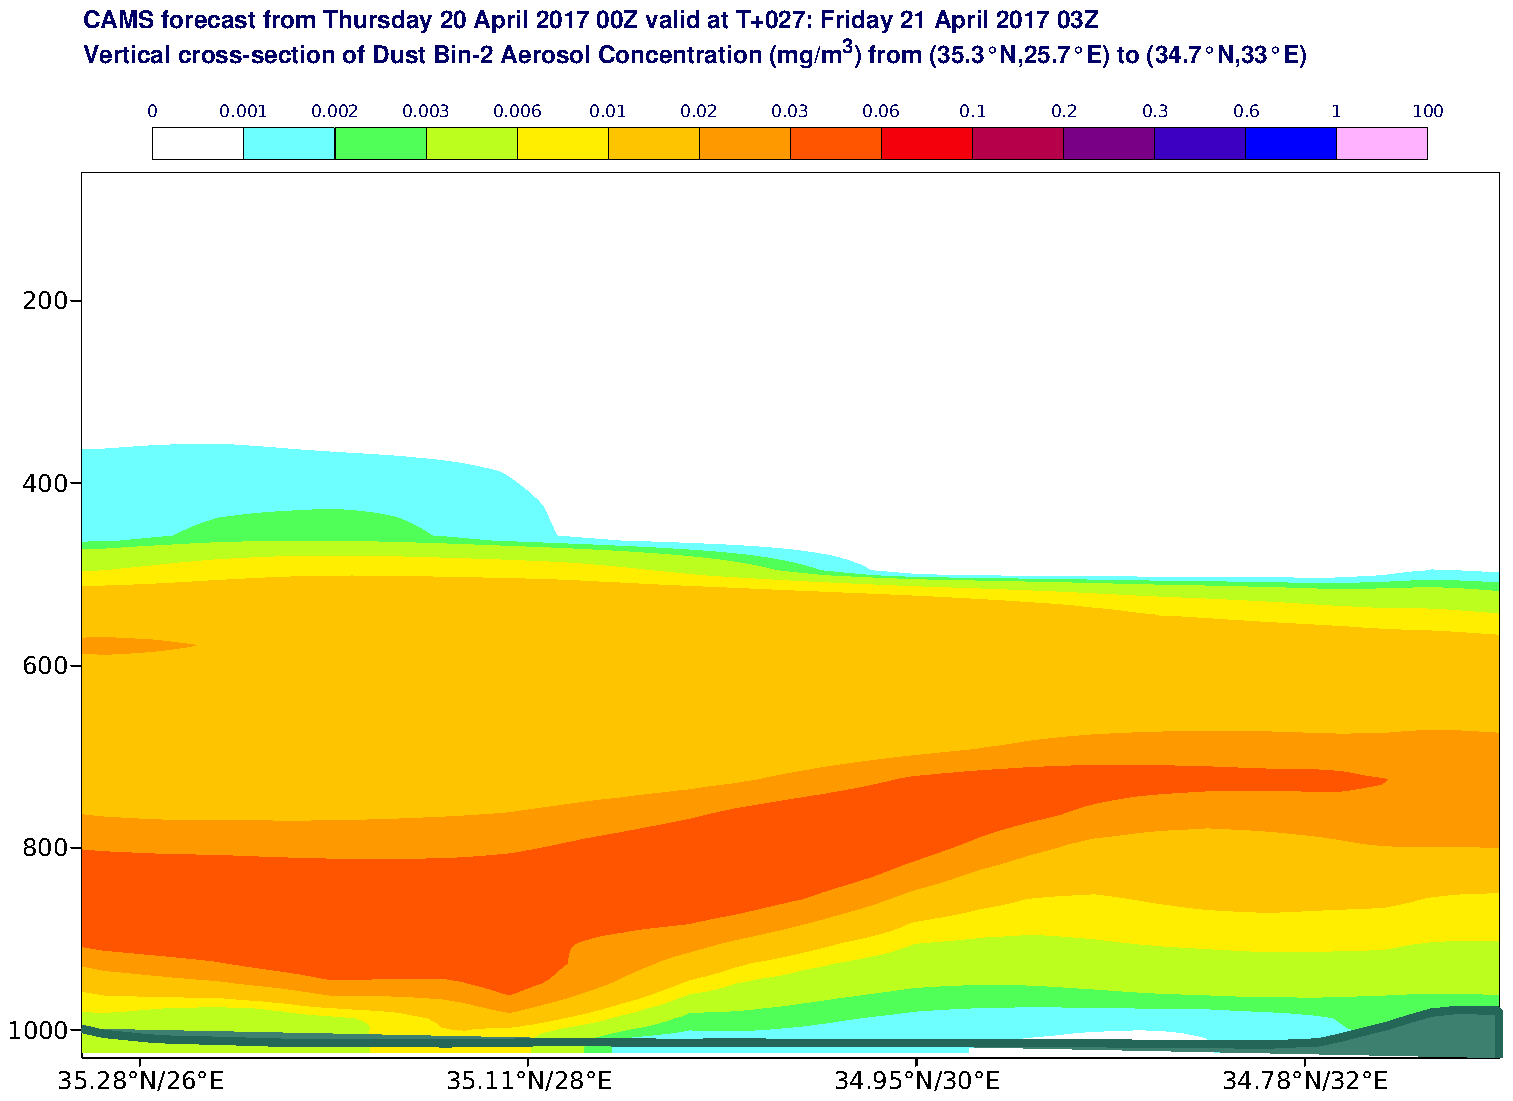 Vertical cross-section of Dust Bin-2 Aerosol Concentration (mg/m3) valid at T27 - 2017-04-21 03:00